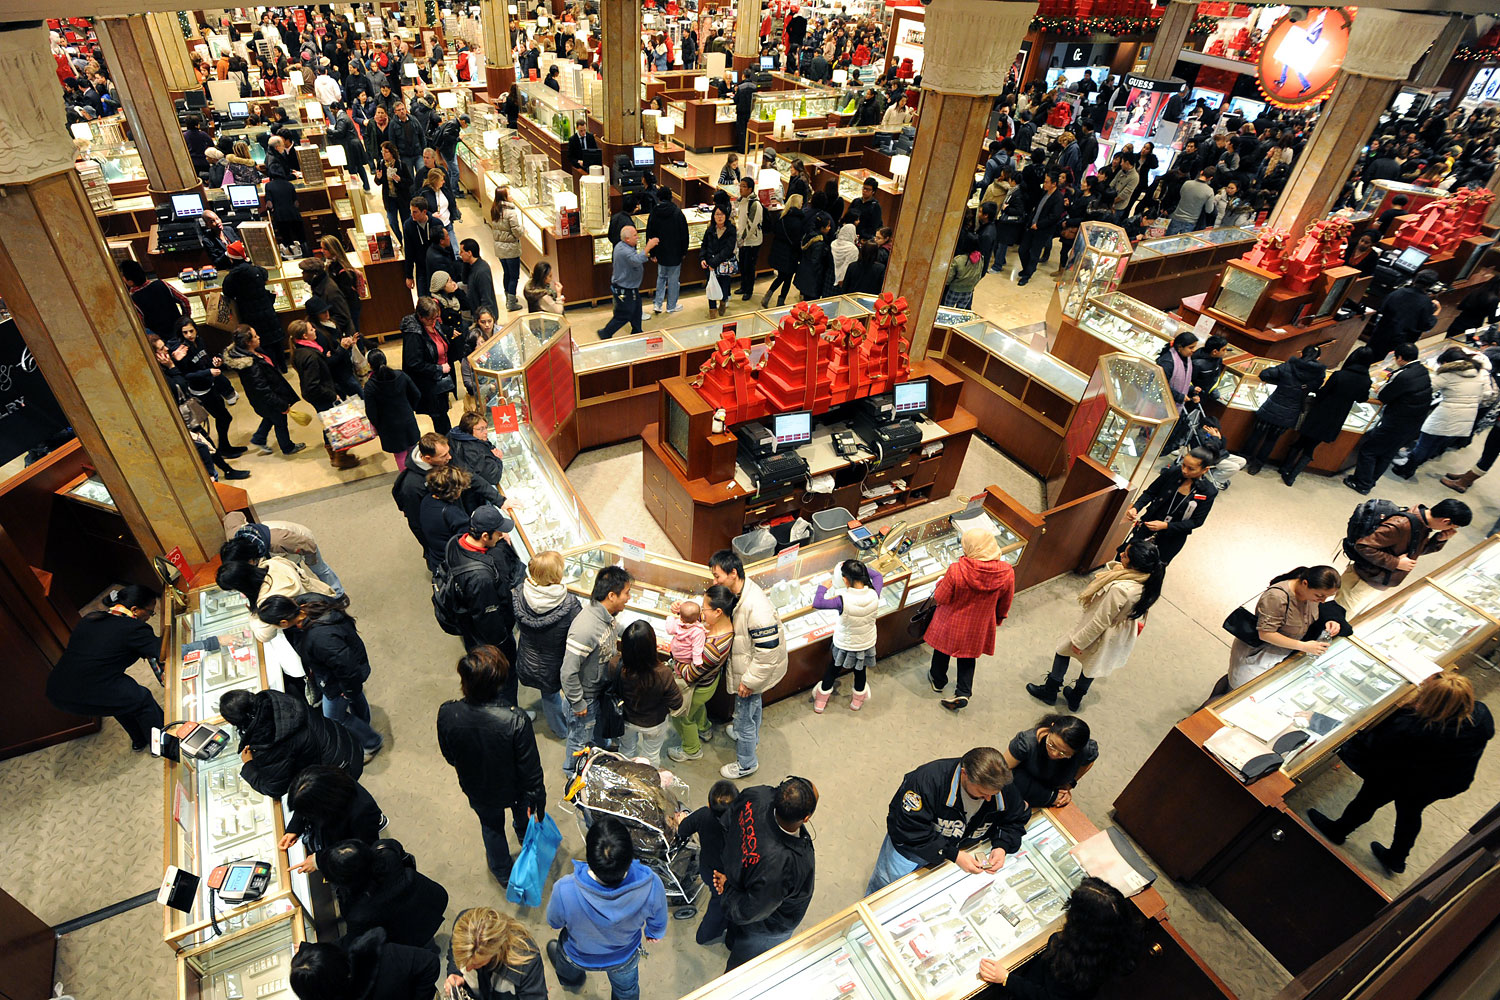 People crowd the aisles inside Macy's department store on Nov. 25, 2011 in New York after the midnight opening to begin the "Black Friday" shopping weekend.